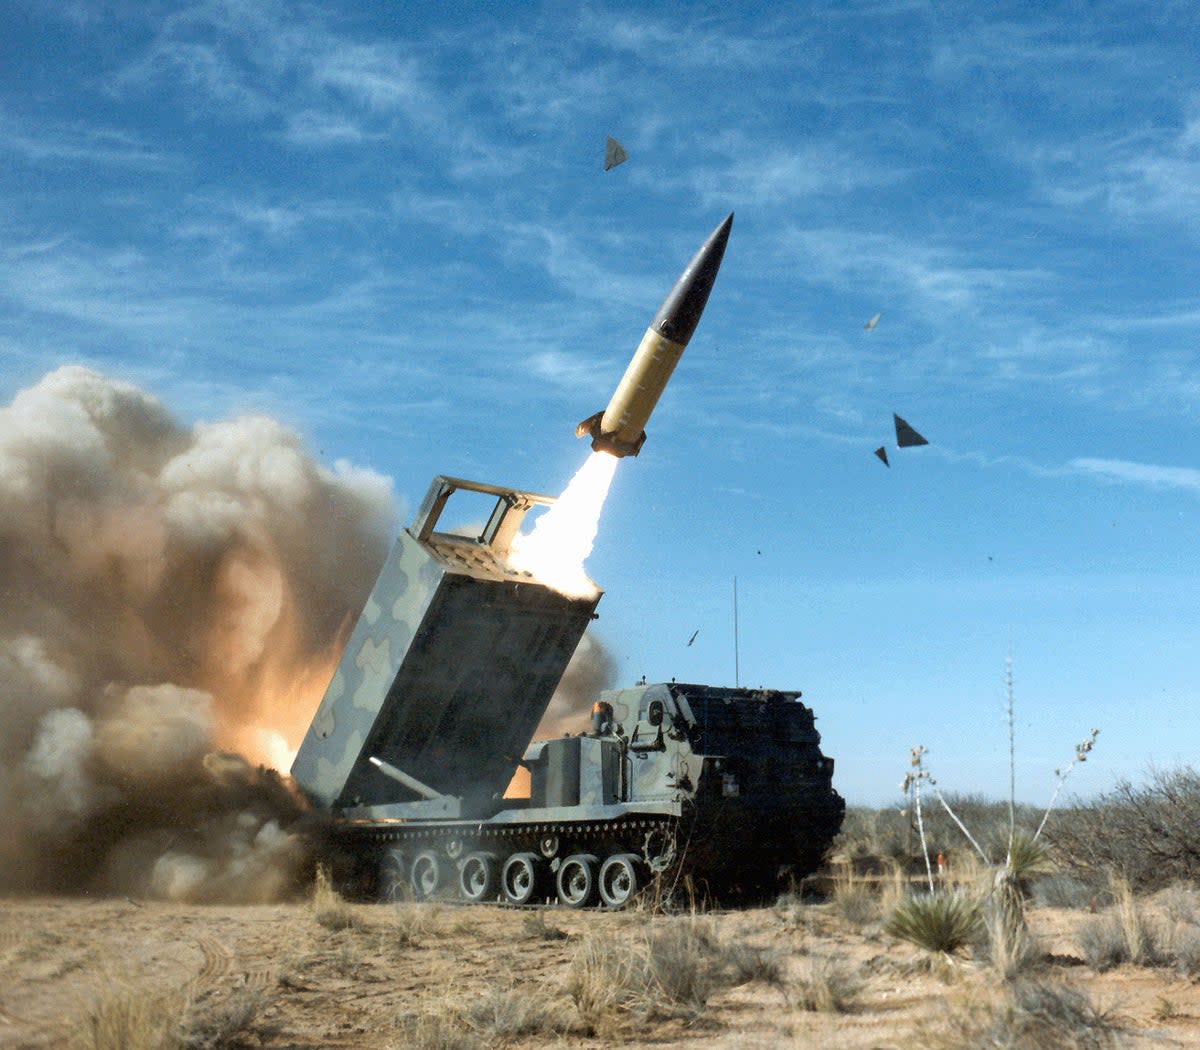 The US Army Tactical Missile System (ATACMS) being launched by an M270 (Wikimedia)